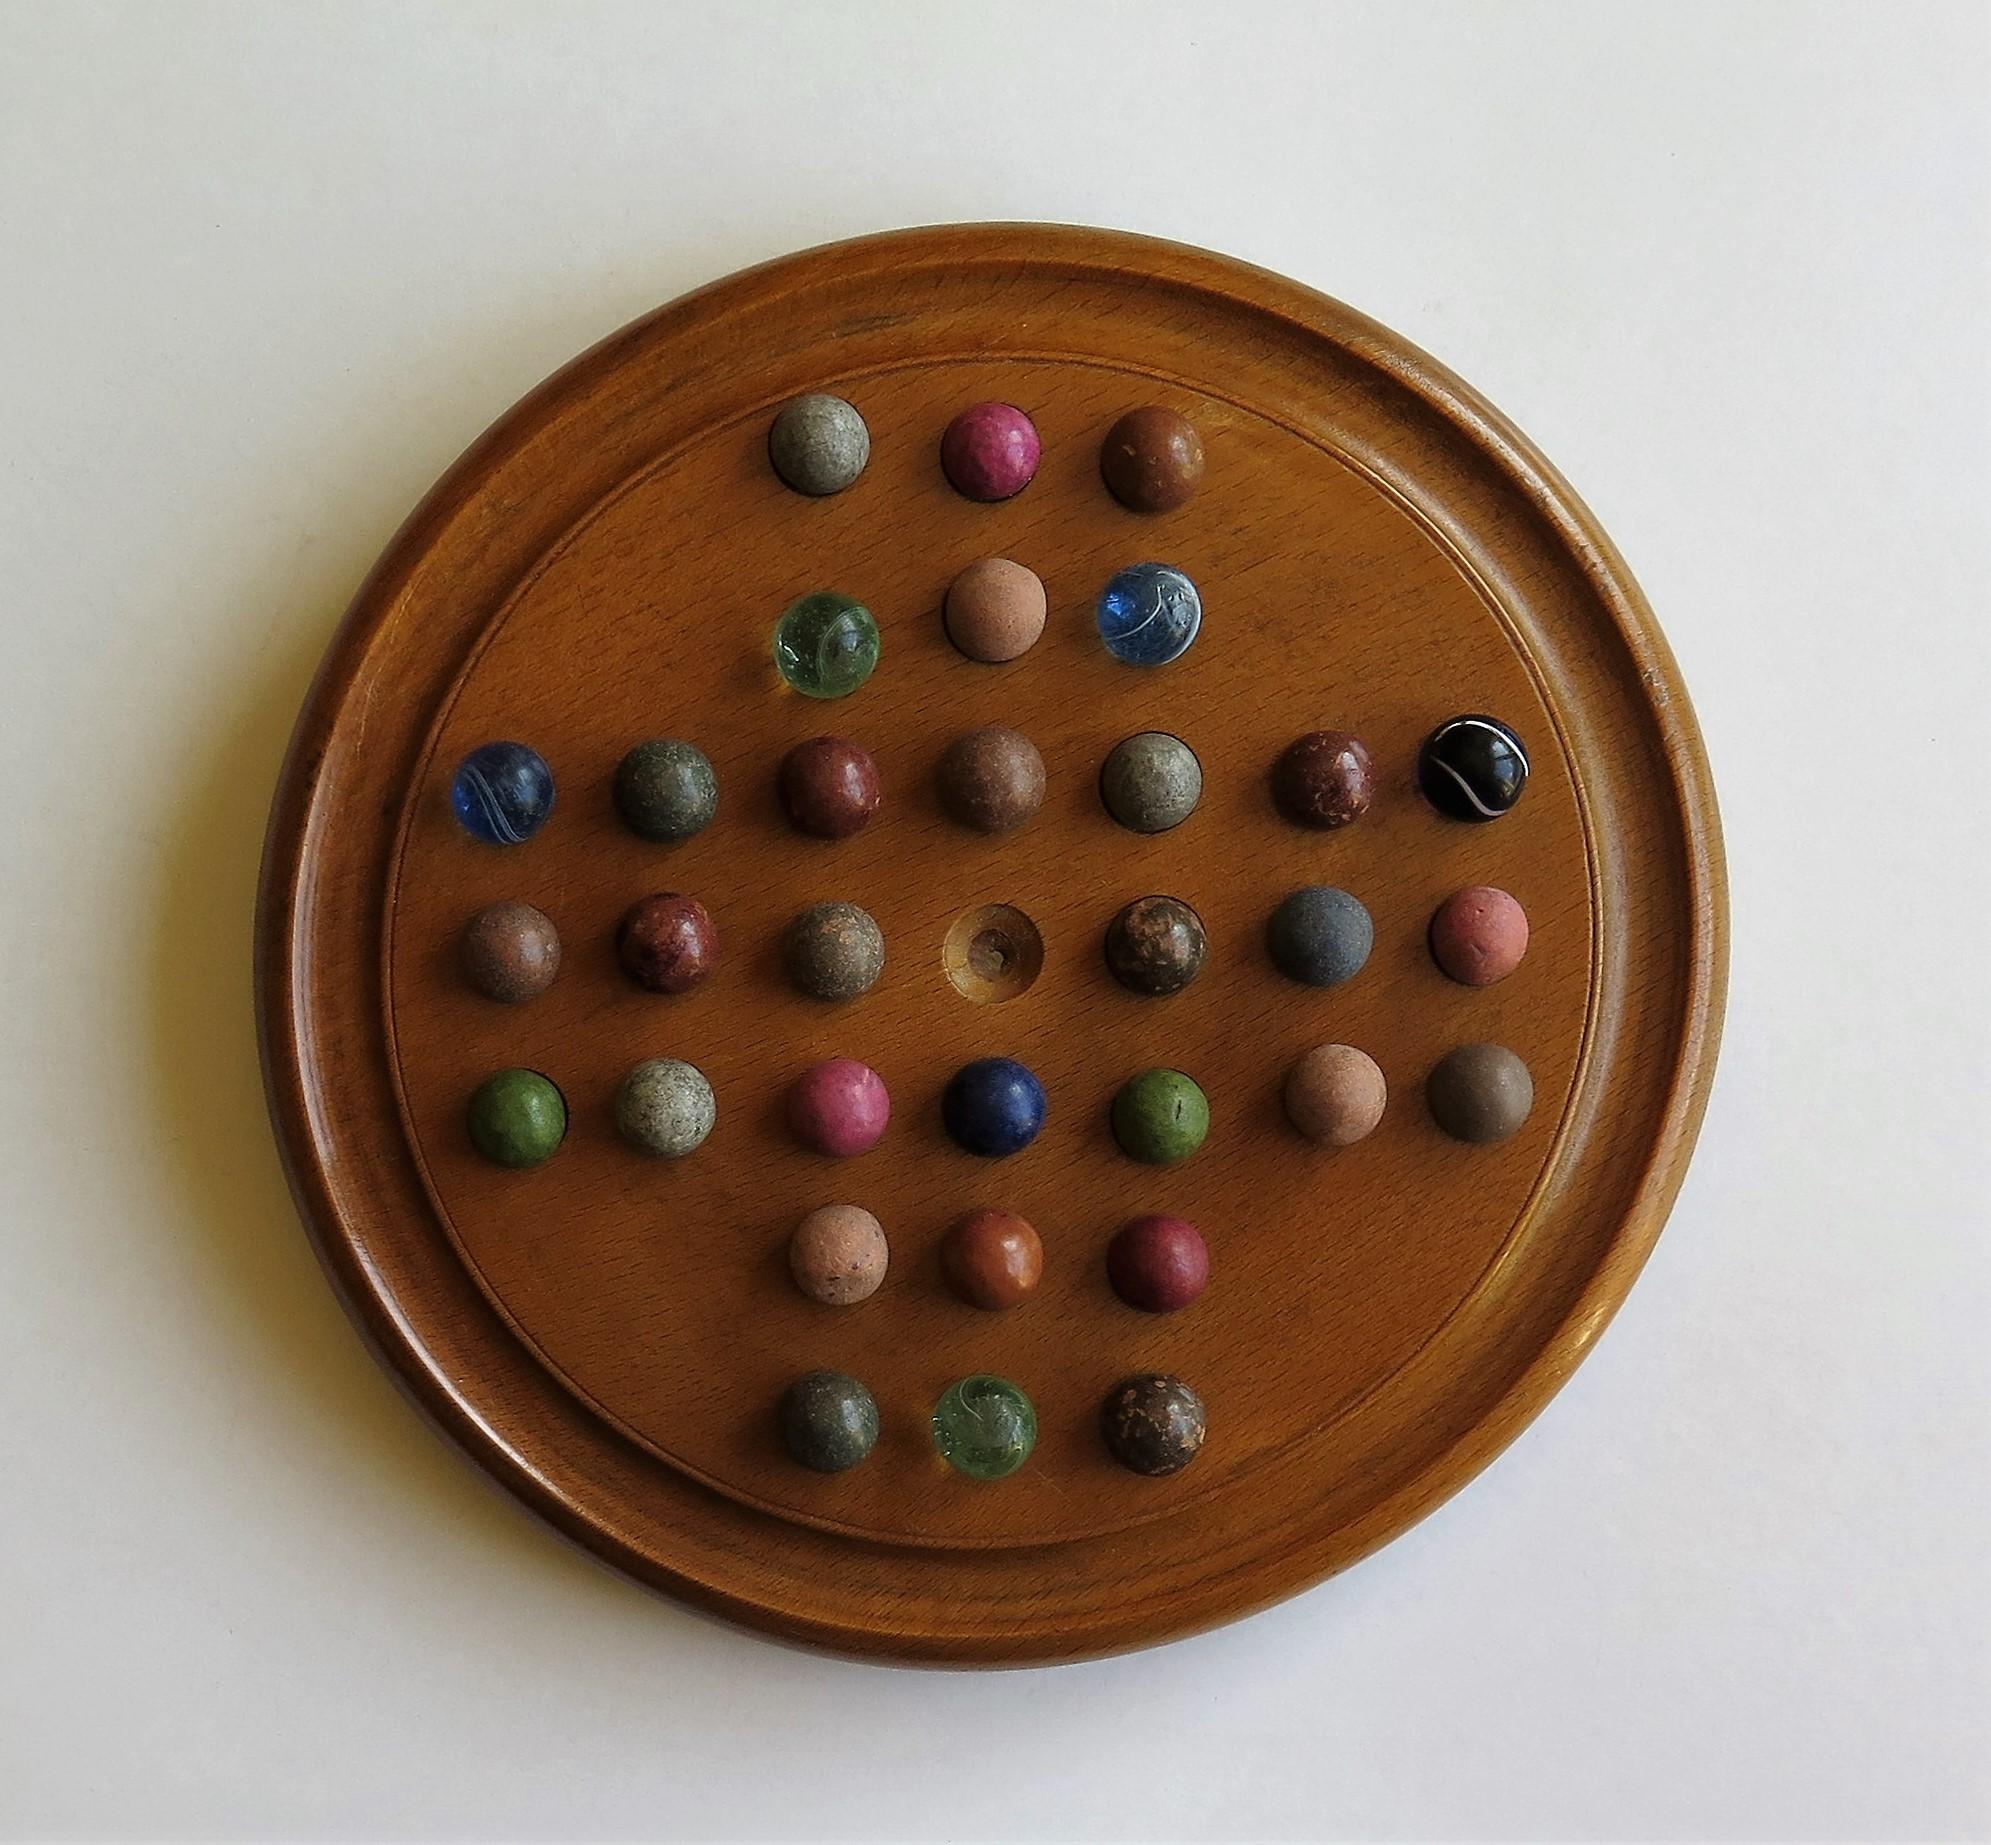 This is a complete game of marble solitaire from the late 19th century with 32 early handmade marbles.

The circular turned board is made of beech or ash and sits on three small wooden bun feet secured with wood screws. The board has 32 holes with